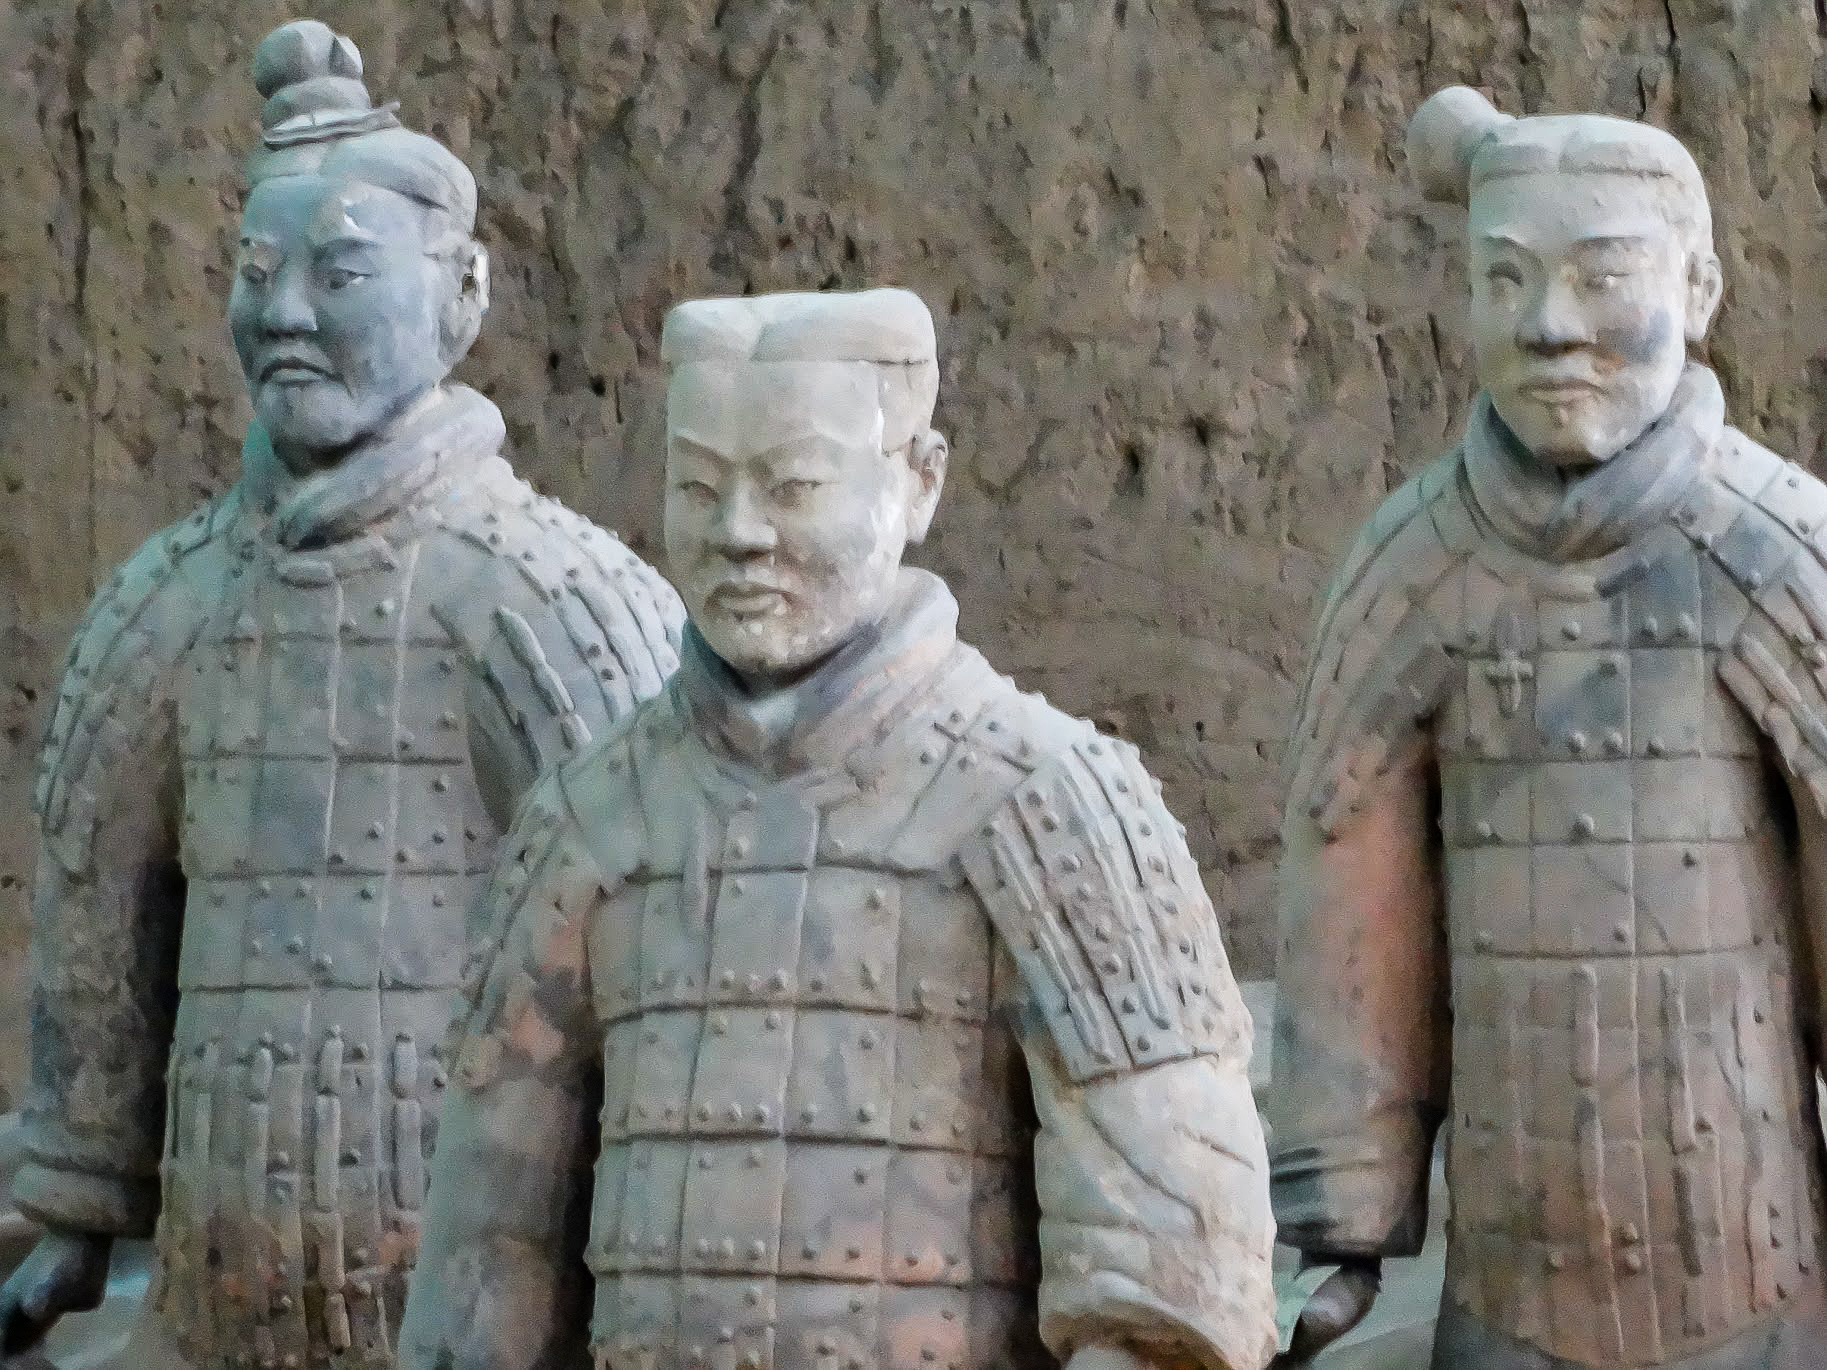 A close up of 3 Terracotta Warriors of the Terracotta Army at Emperor Qinshihuang's Mausoleum, Xian, China